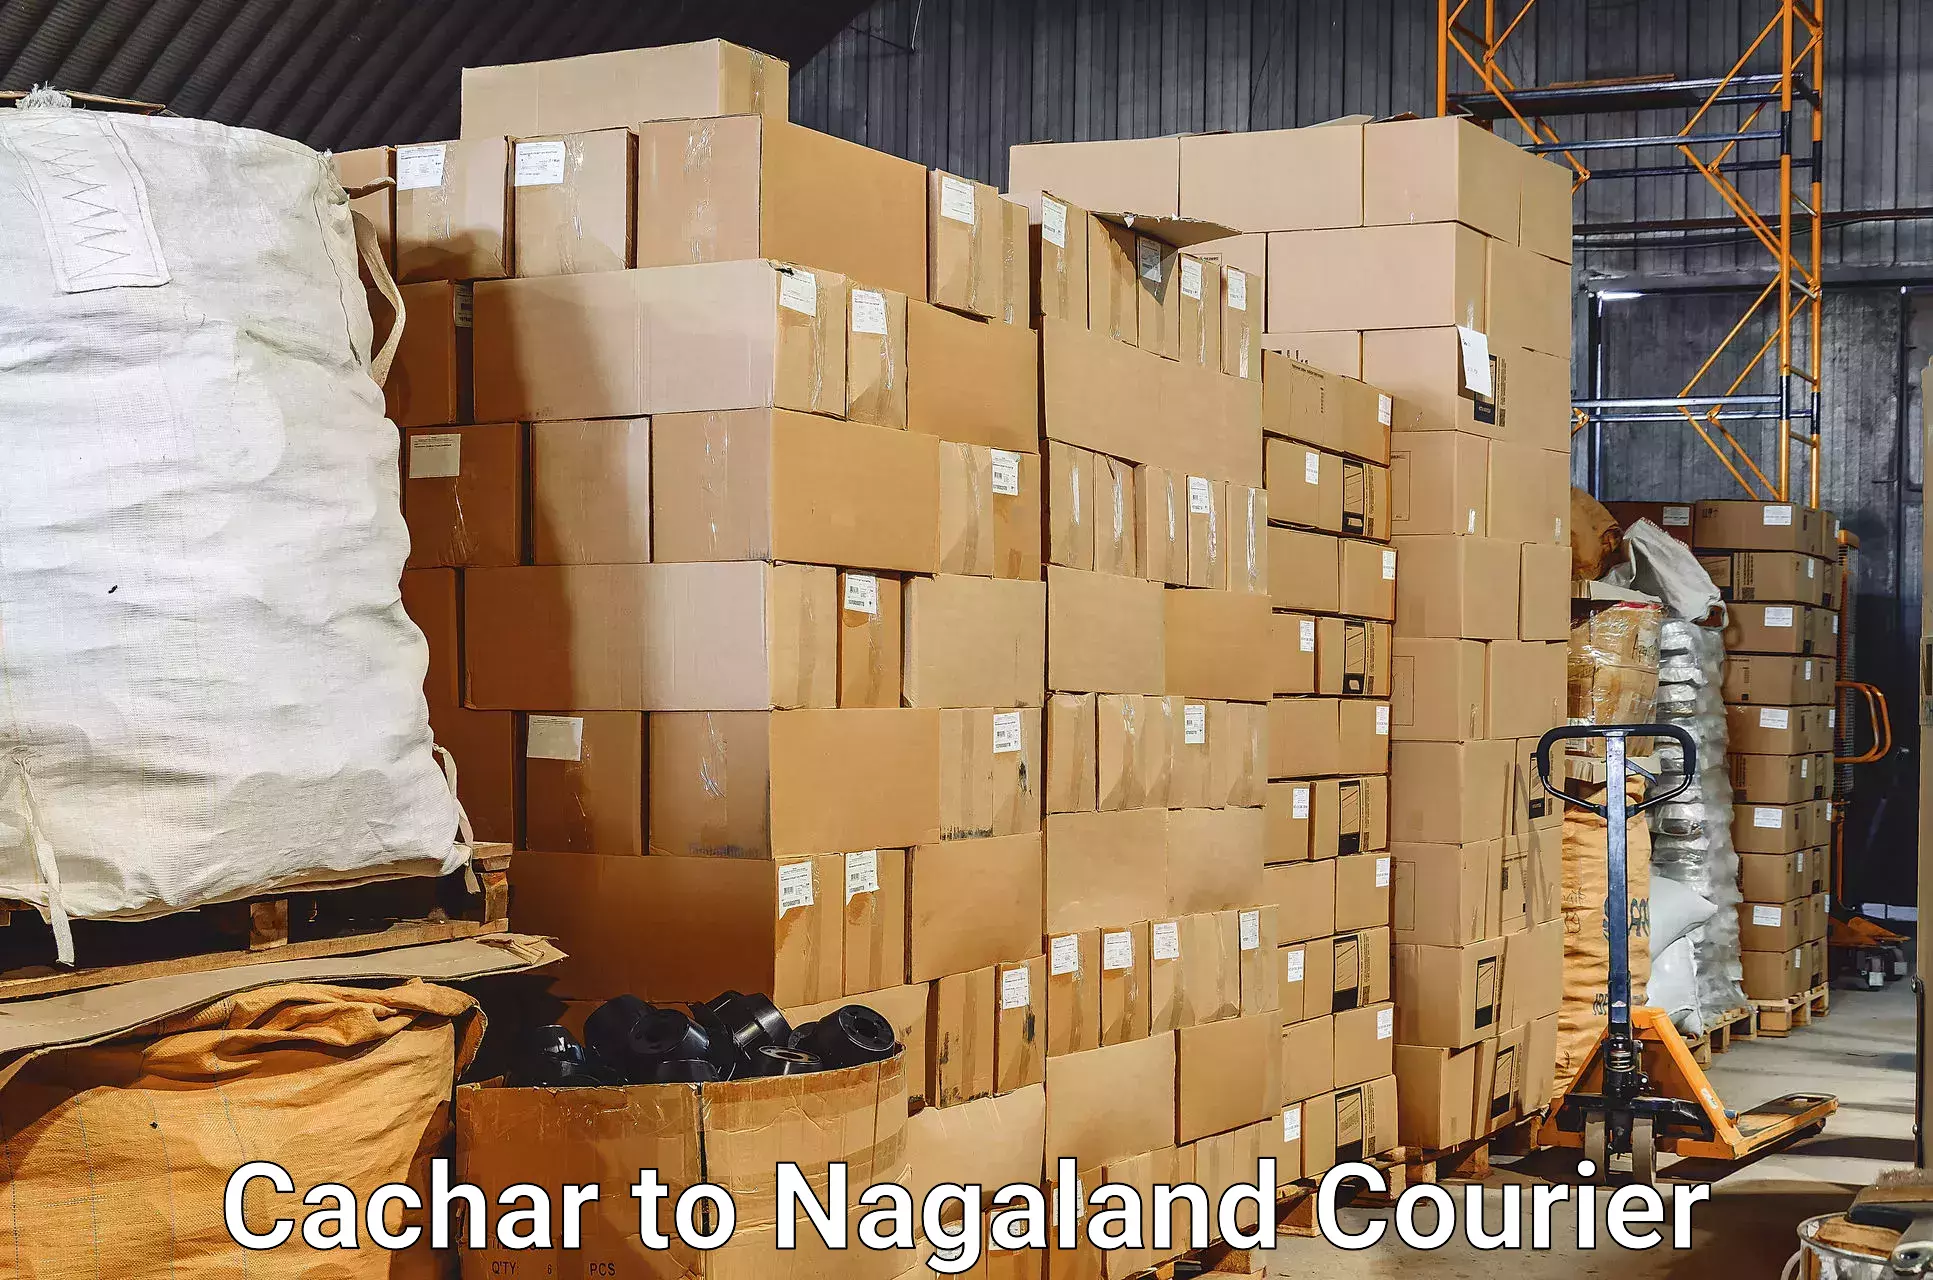 Luggage shipment specialists Cachar to Nagaland